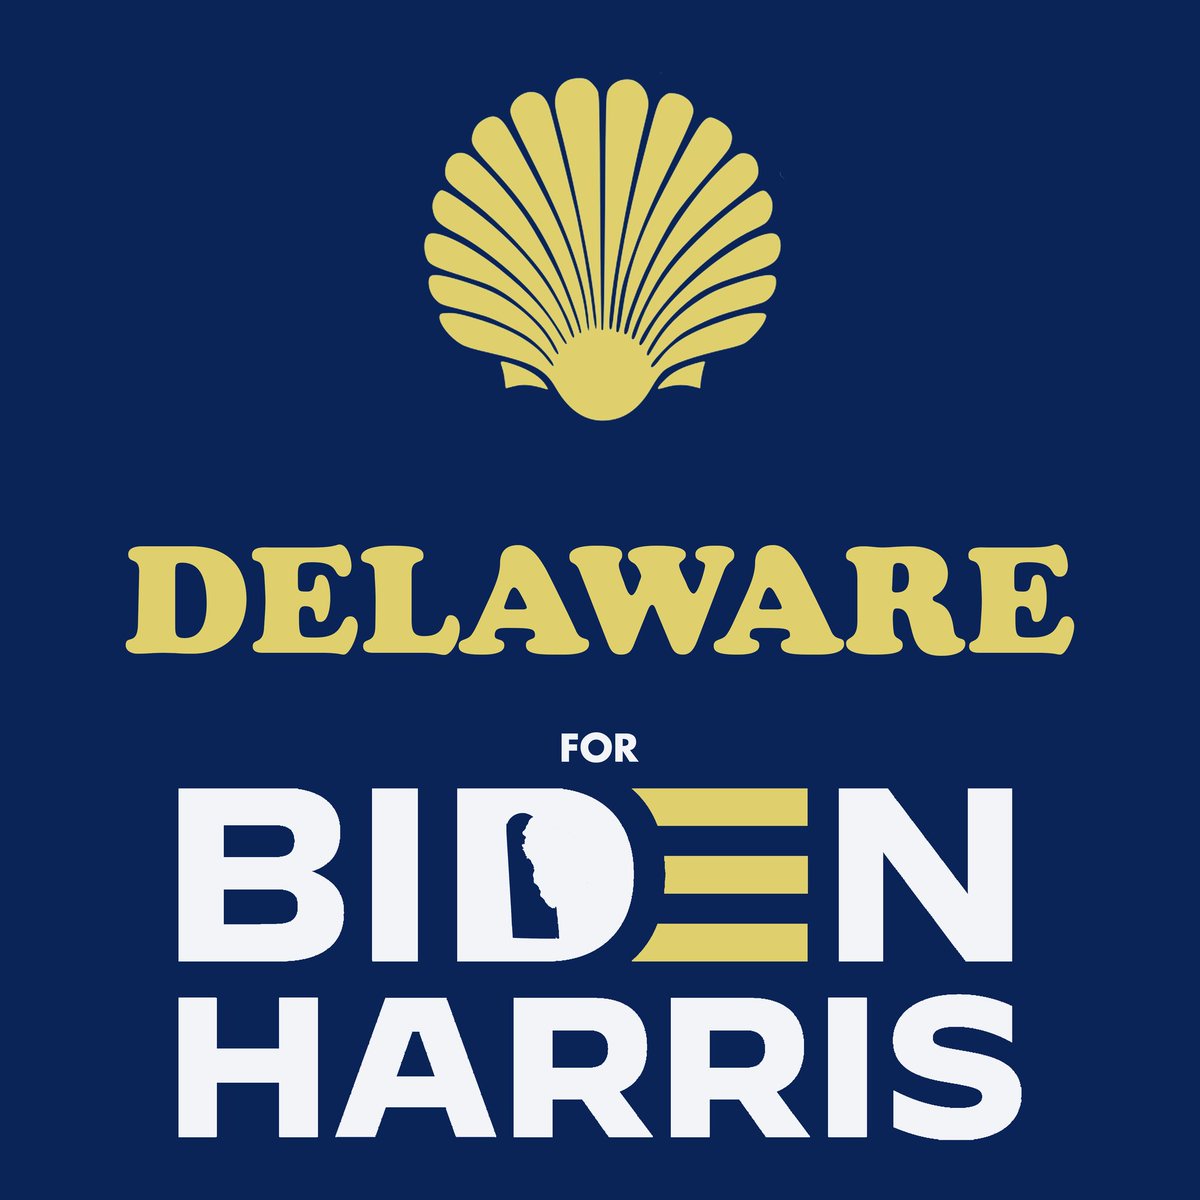 ICYMI my husband  @viva_verde is incredibly talented and made these beautiful state coalition graphics for  #BidenHarris supporters. More otw and he takes requests for priority! RT your state if you're  #RidinWithBidenHarris 2/8  #Delaware  #Florida  #Georgia  #Illinois